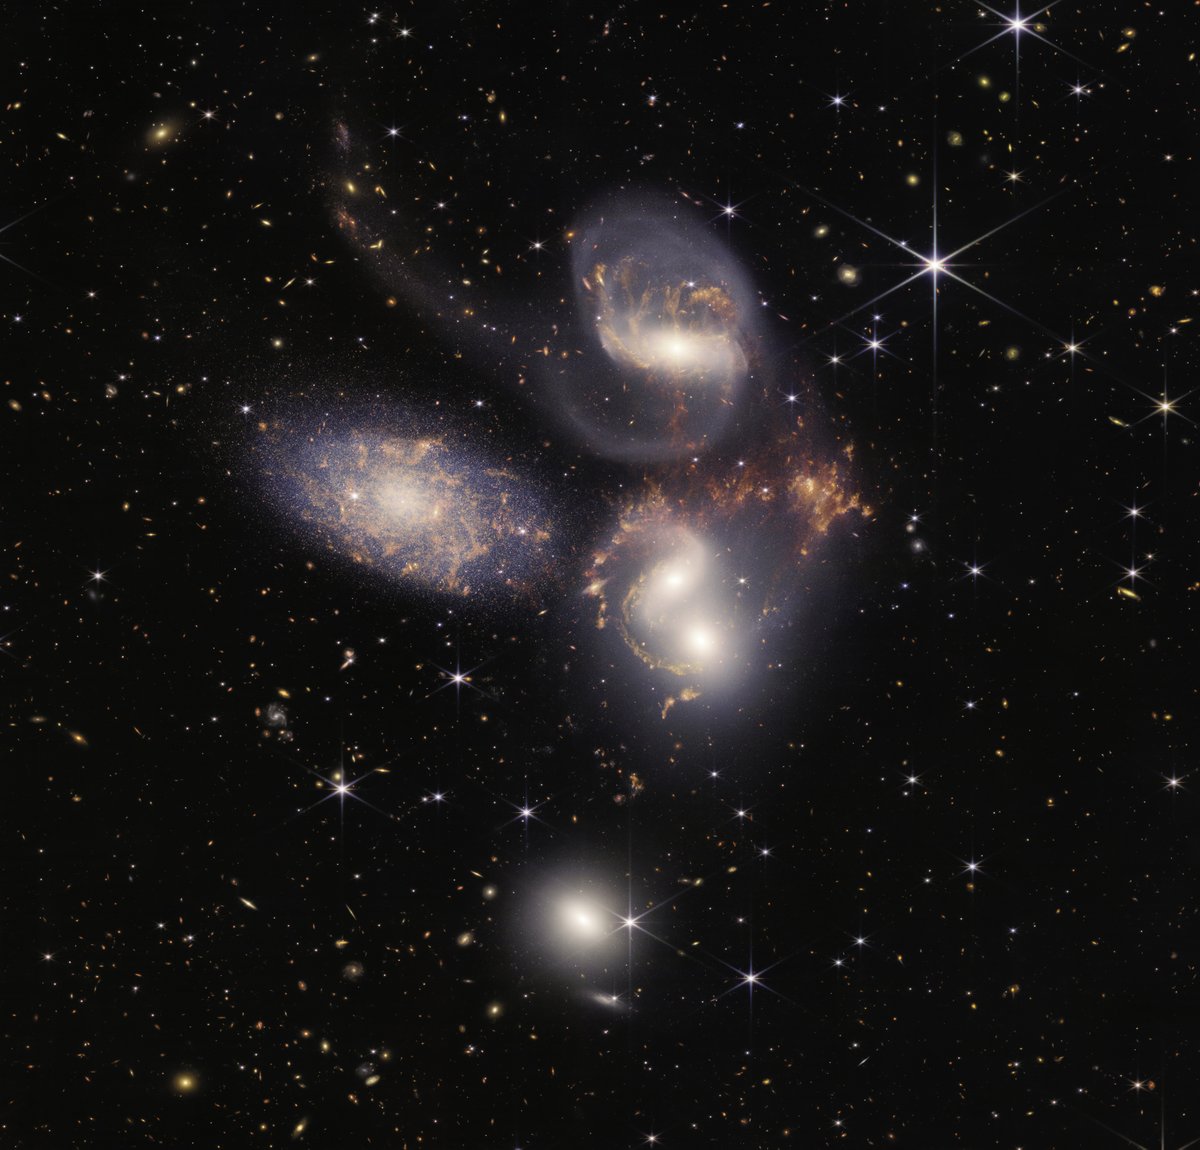 Take Five: Captured in exquisite detail, @NASAWebb peered through the thick dust of Stephan’s Quintet, a galaxy cluster showing huge shockwaves and tidal tails. This is a front-row seat to galactic evolution: nasa.gov/webbfirstimages #UnfoldTheUniverse